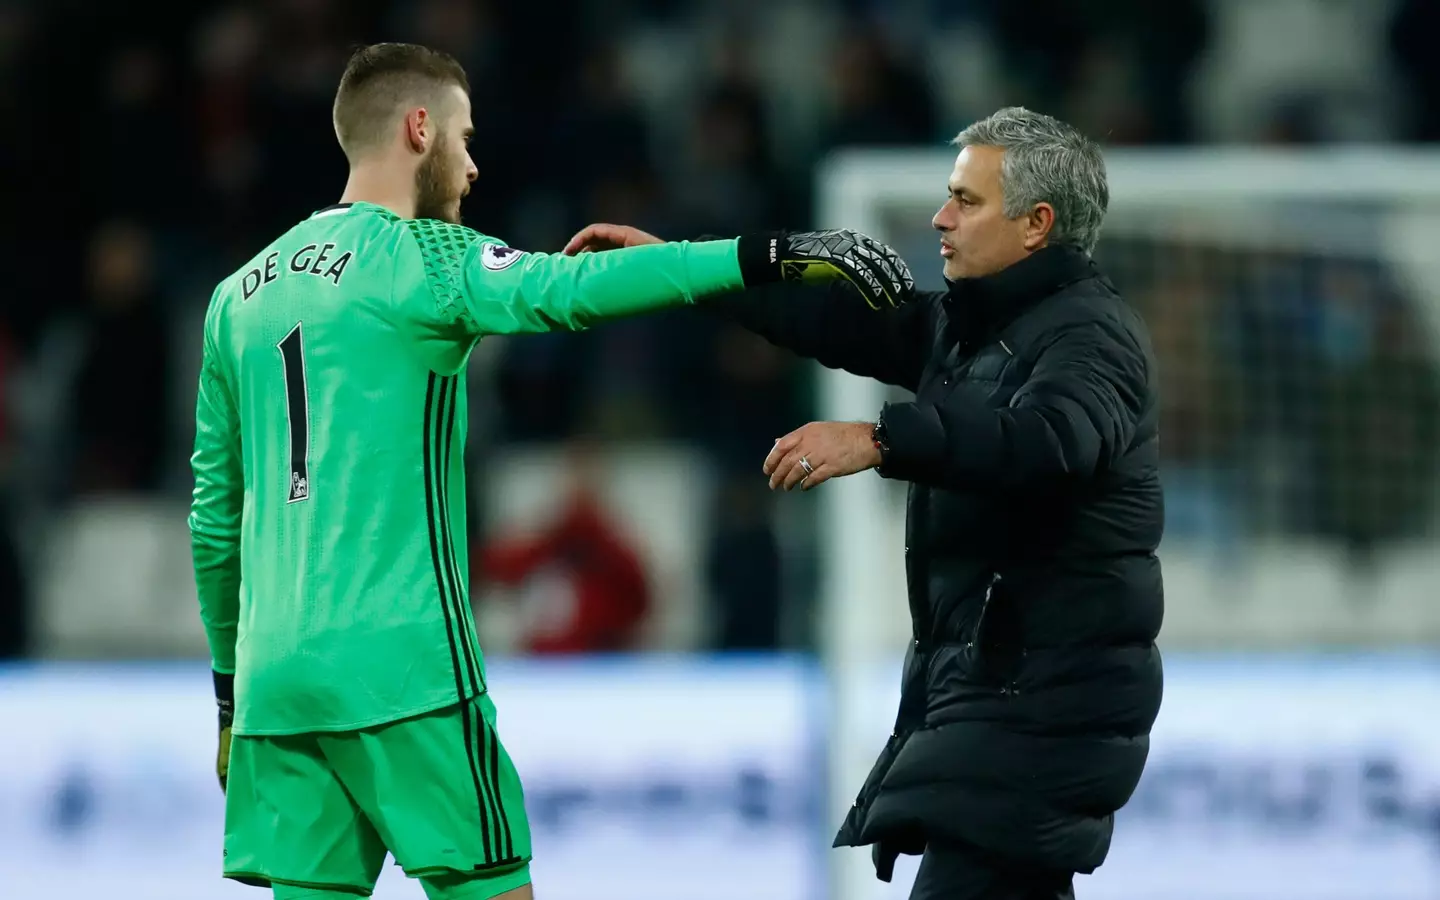 Mourinho and de Gea embrace following victory over West Ham United in 2017. (Image